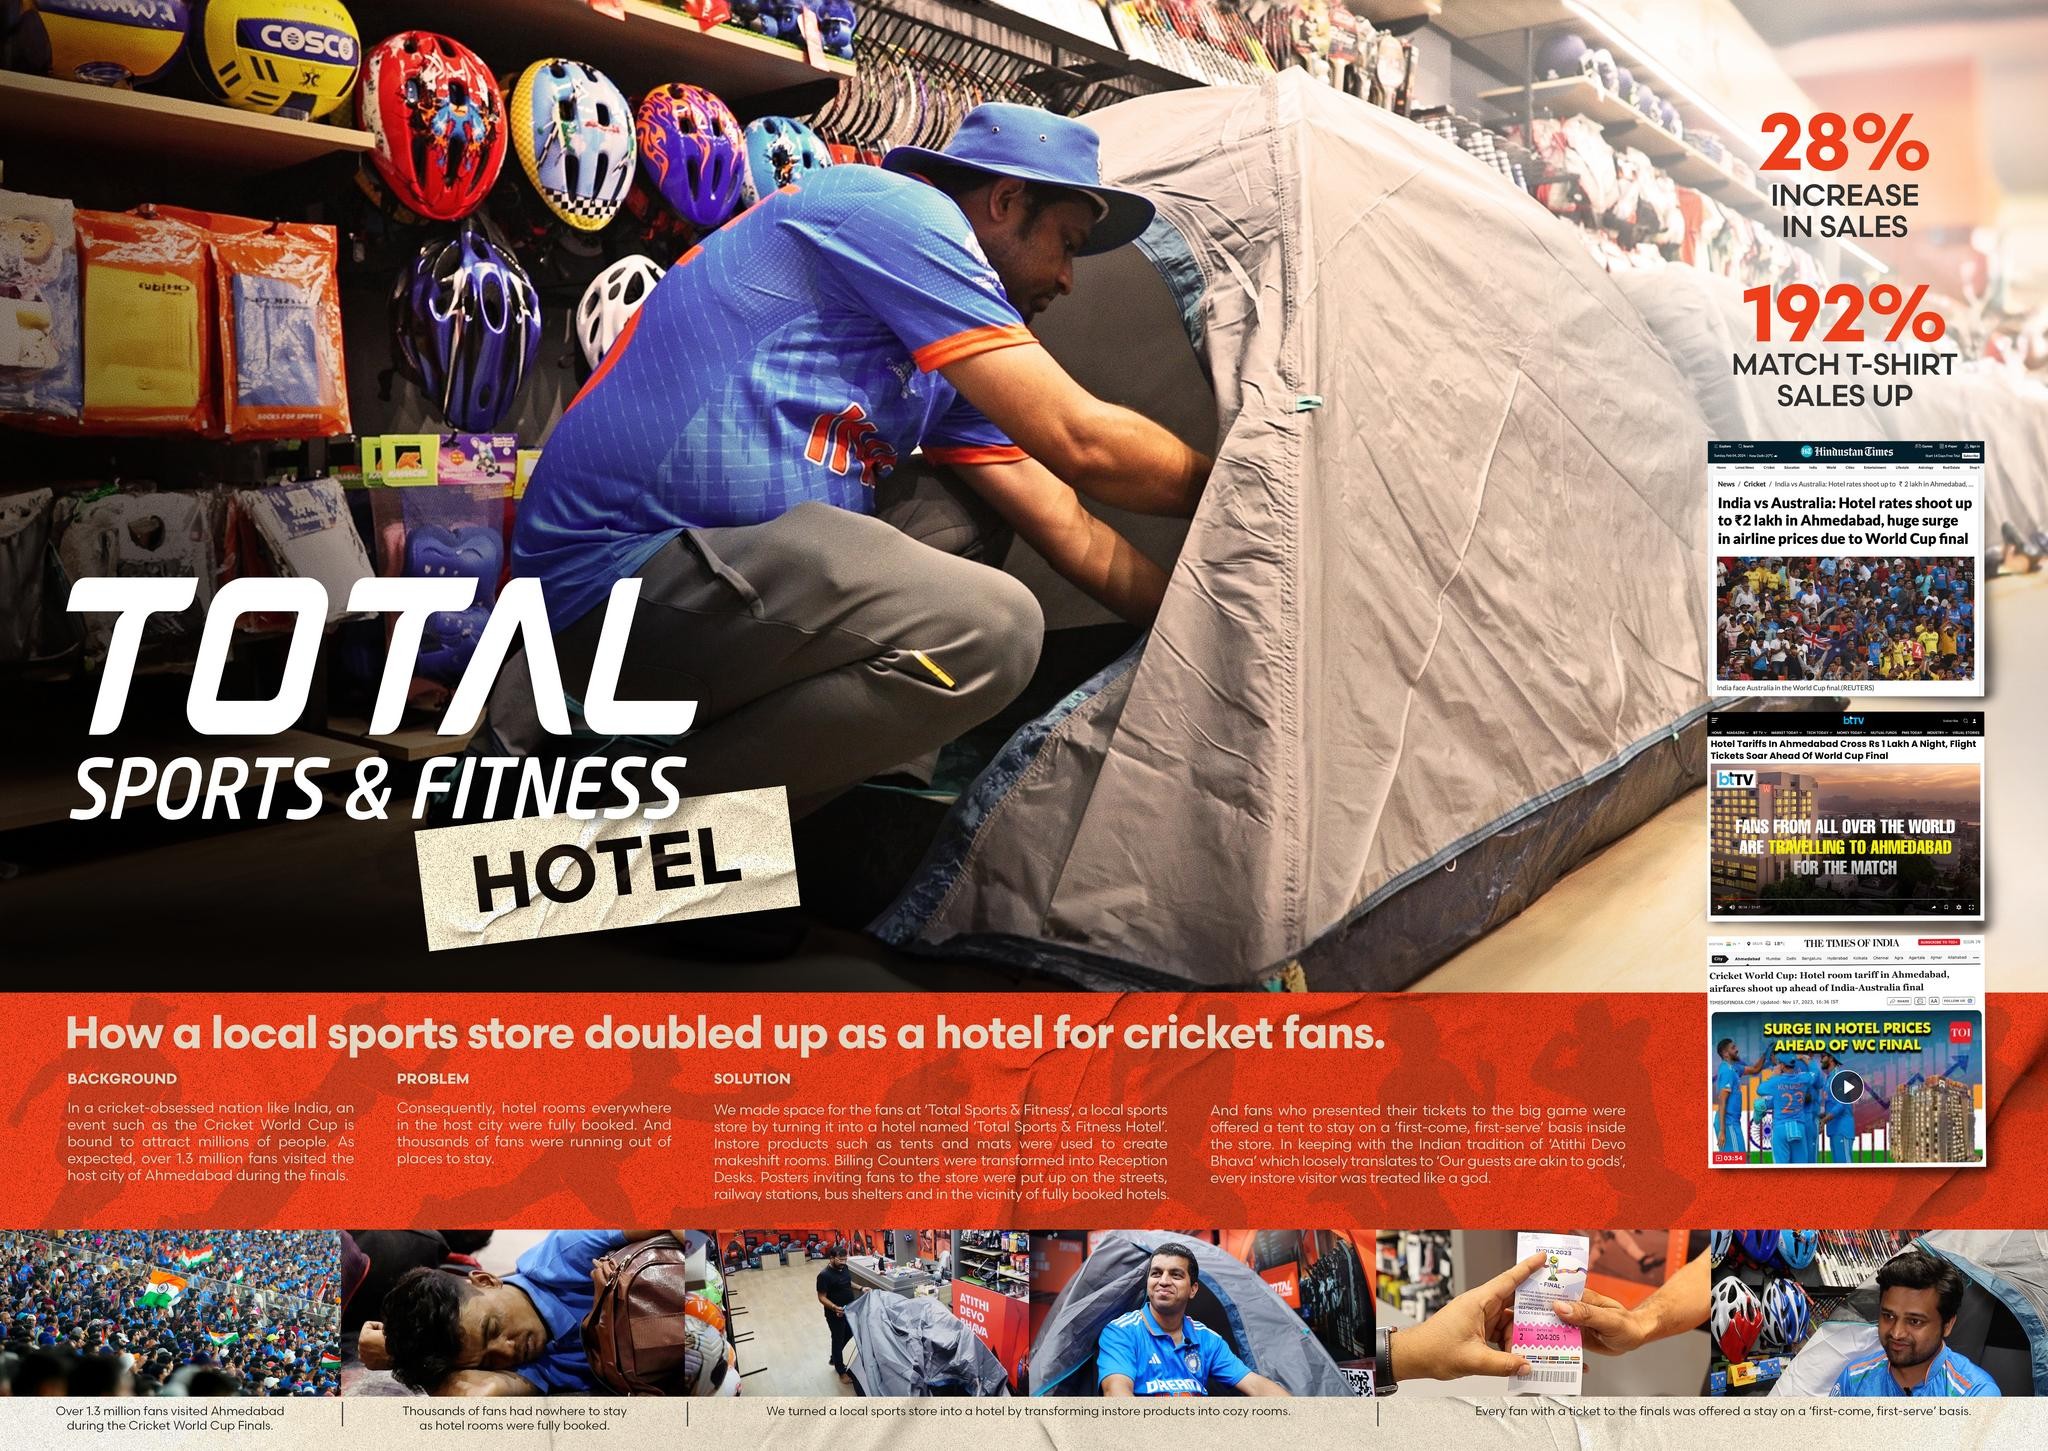 TOTAL SPORTS & FITNESS HOTEL